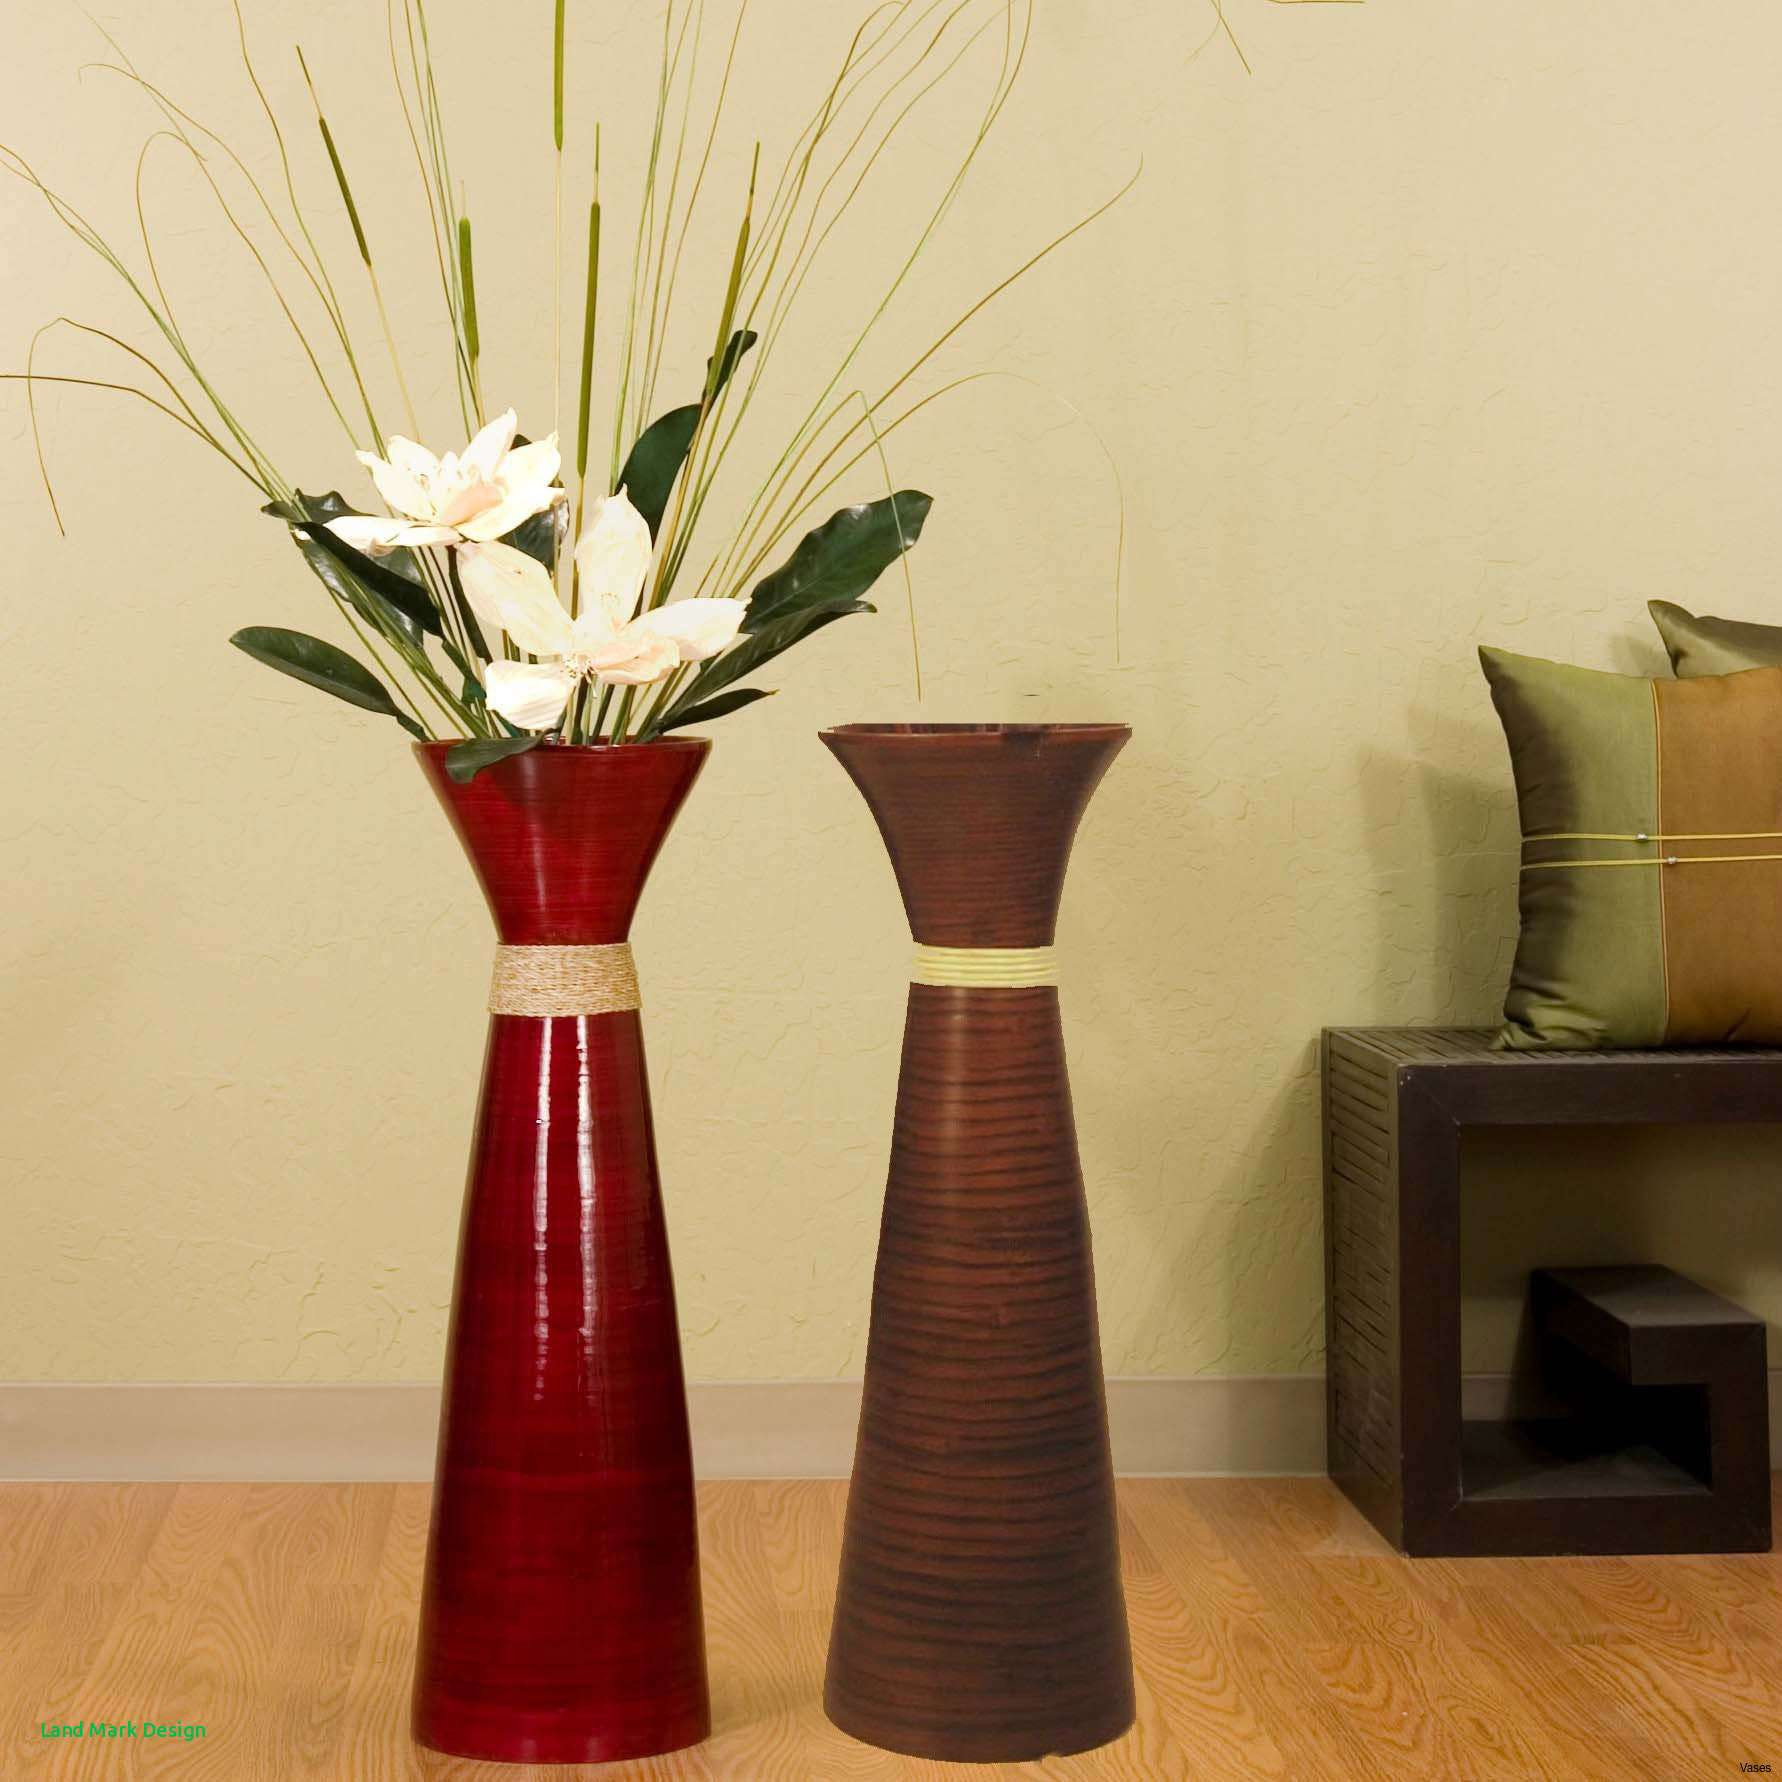 18 Nice Standing Vases for Living Room 2023 free download standing vases for living room of floor vases decoration ideas design home design pertaining to floor vase colorsh vases red decorative image of colorsi 0d